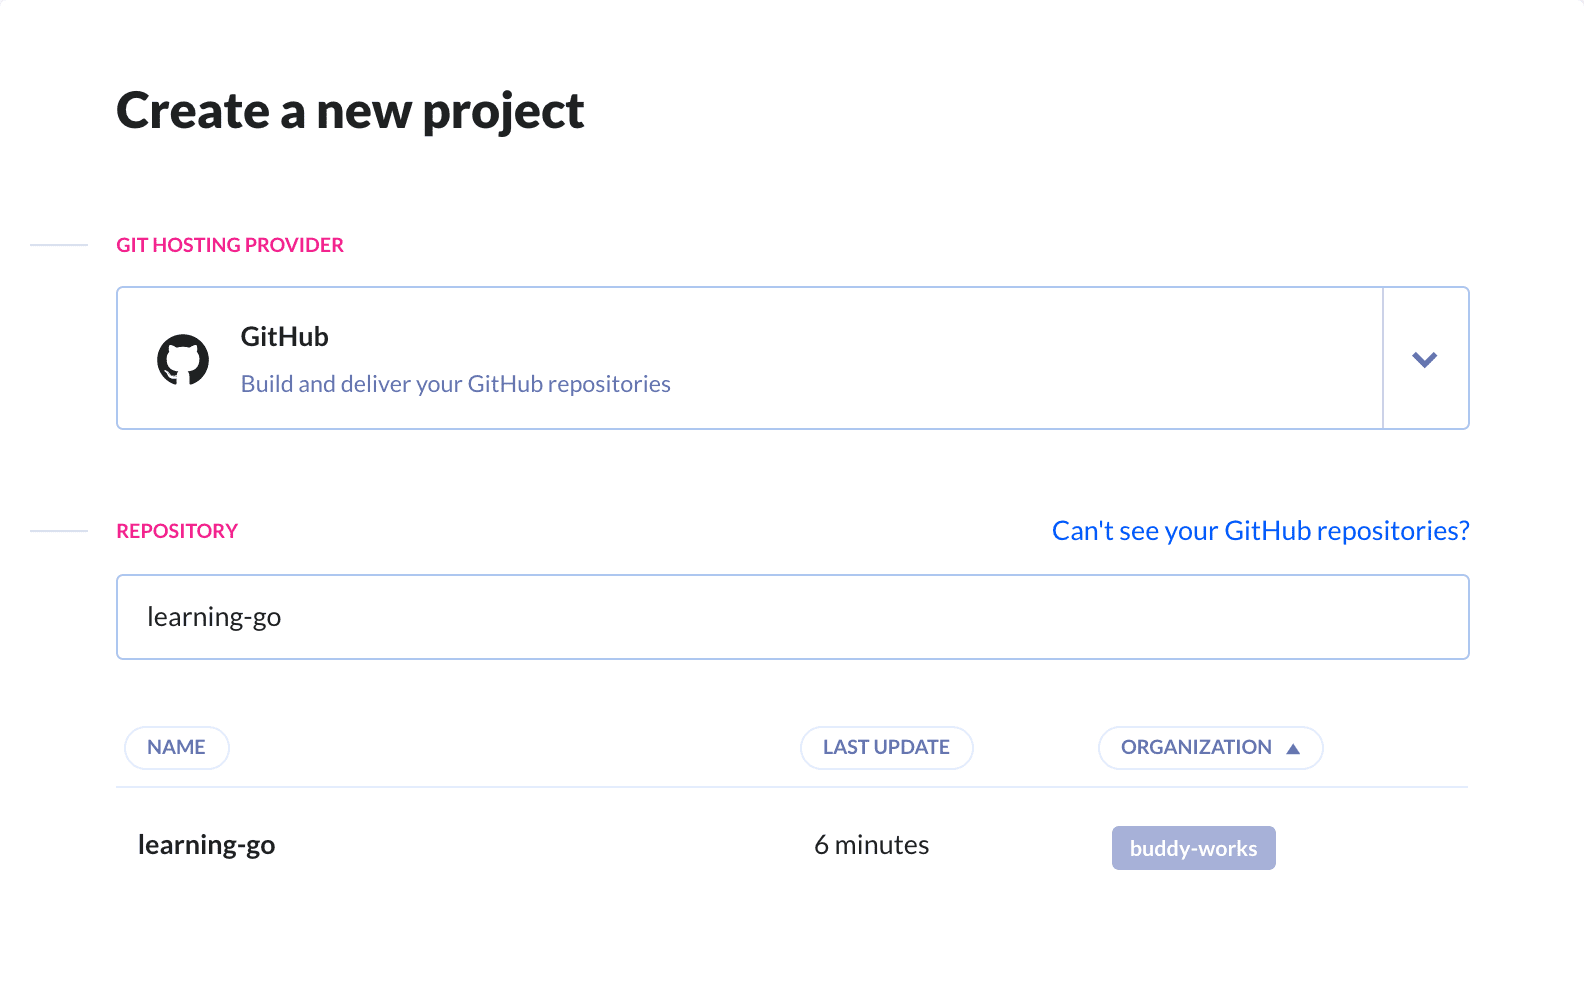 Creating a new project in Buddy